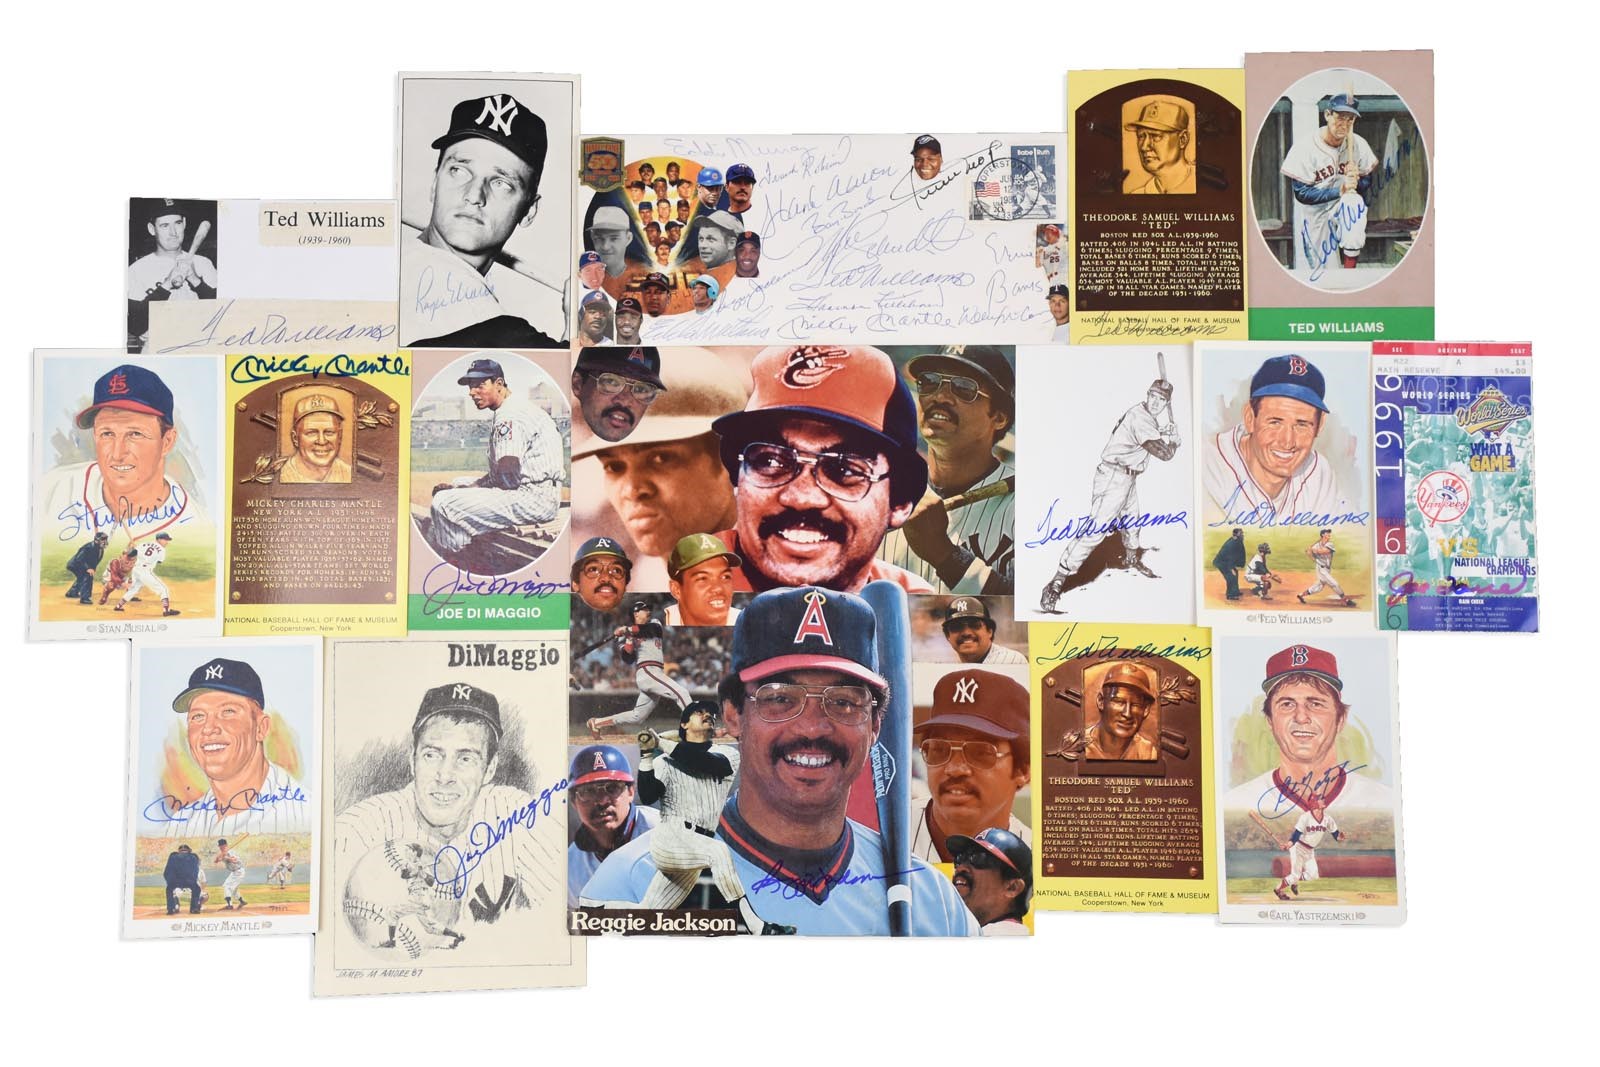 Kubina And The Mick - Hall of Famers and Stars Autograph Collection - (5) Mantle (9), Williams, Maris (250+)